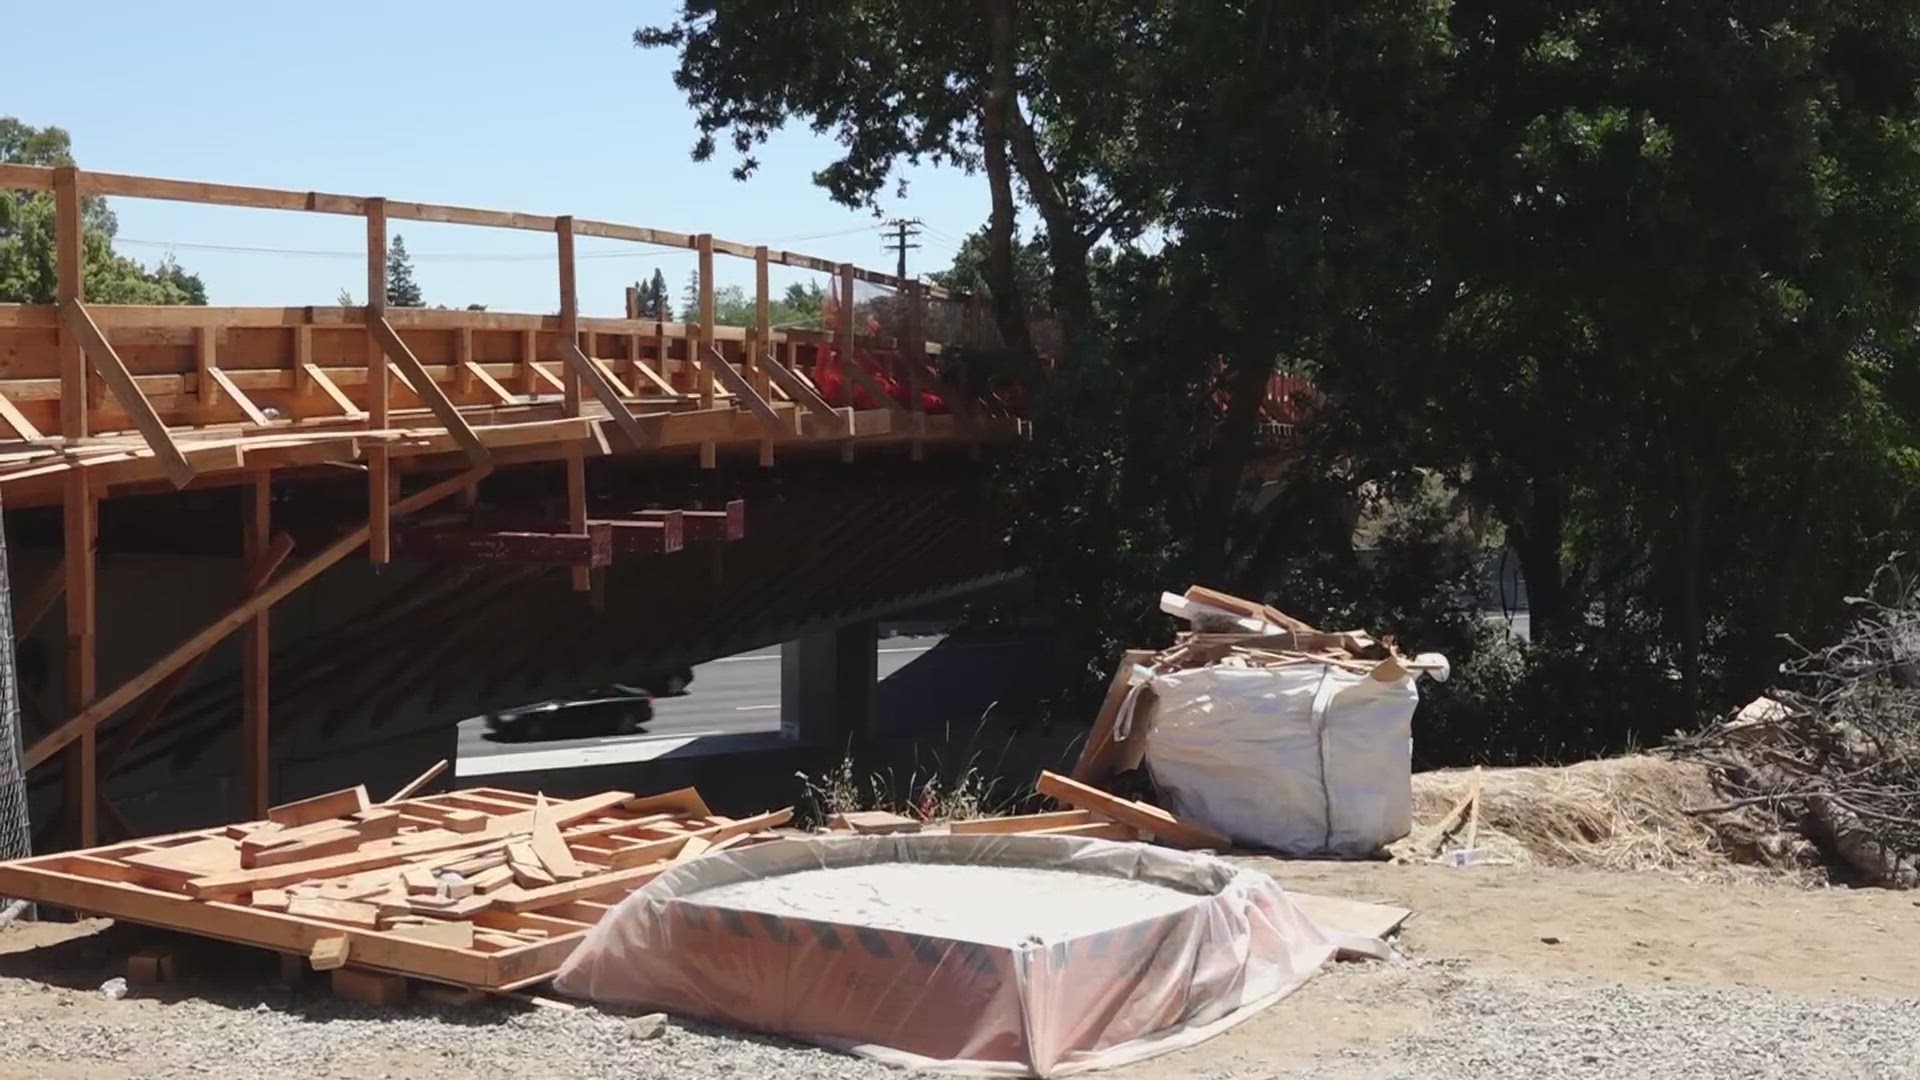 Sacramento's Del Rio Trail is expected to be completed soon.